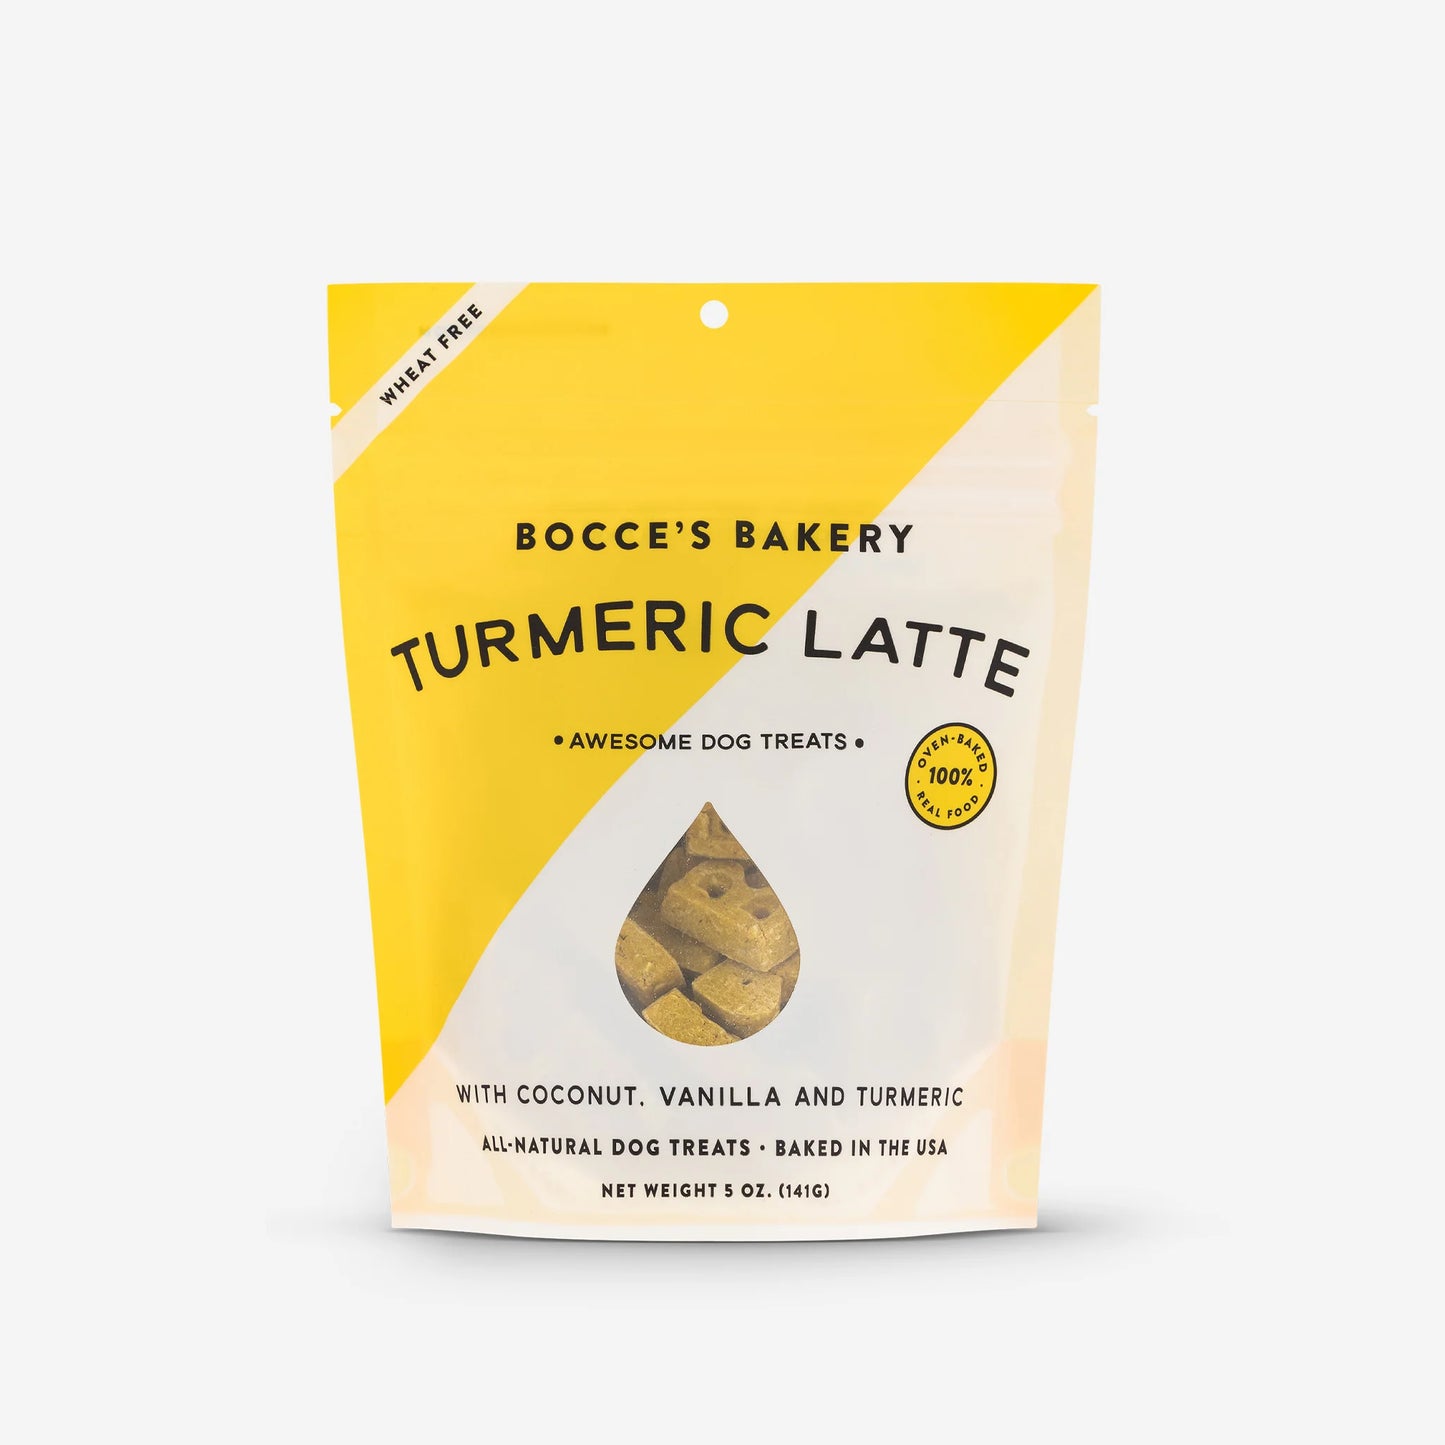 Your Whole Dog's bakery offers a nutrient-packed Bocce's Bakery: Turmeric Latte Biscuits (5oz/141g) dog treat crafted with natural and healthy ingredients. These wheat-free dog treats are perfect for health-obsessed pet owners looking to provide their furry friends.